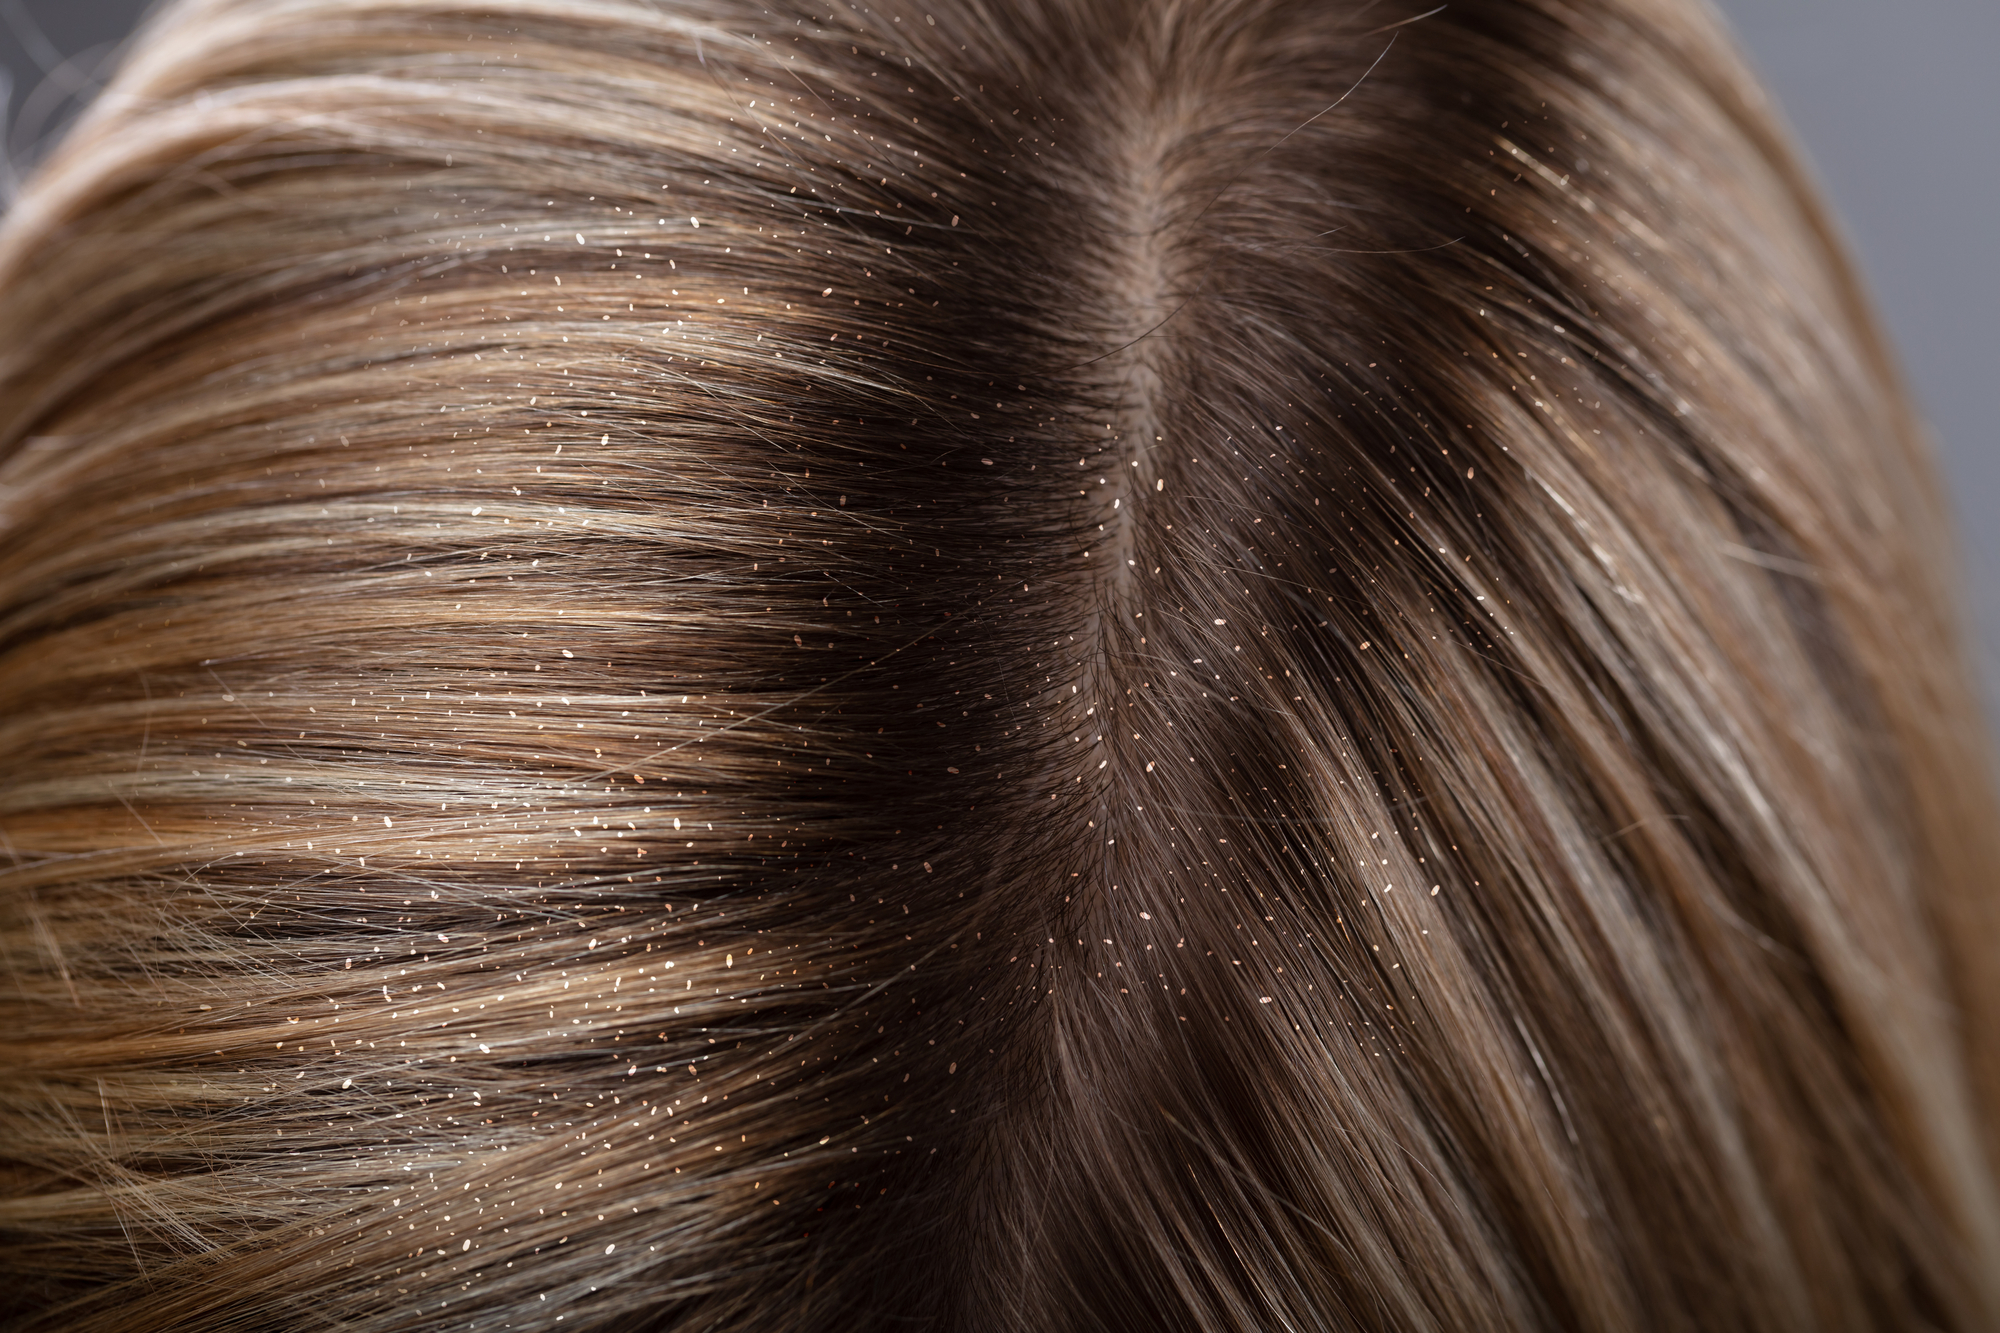 Dry, Irritated Scalp? Could Be Head Lice! - Lice Clinics of Texas